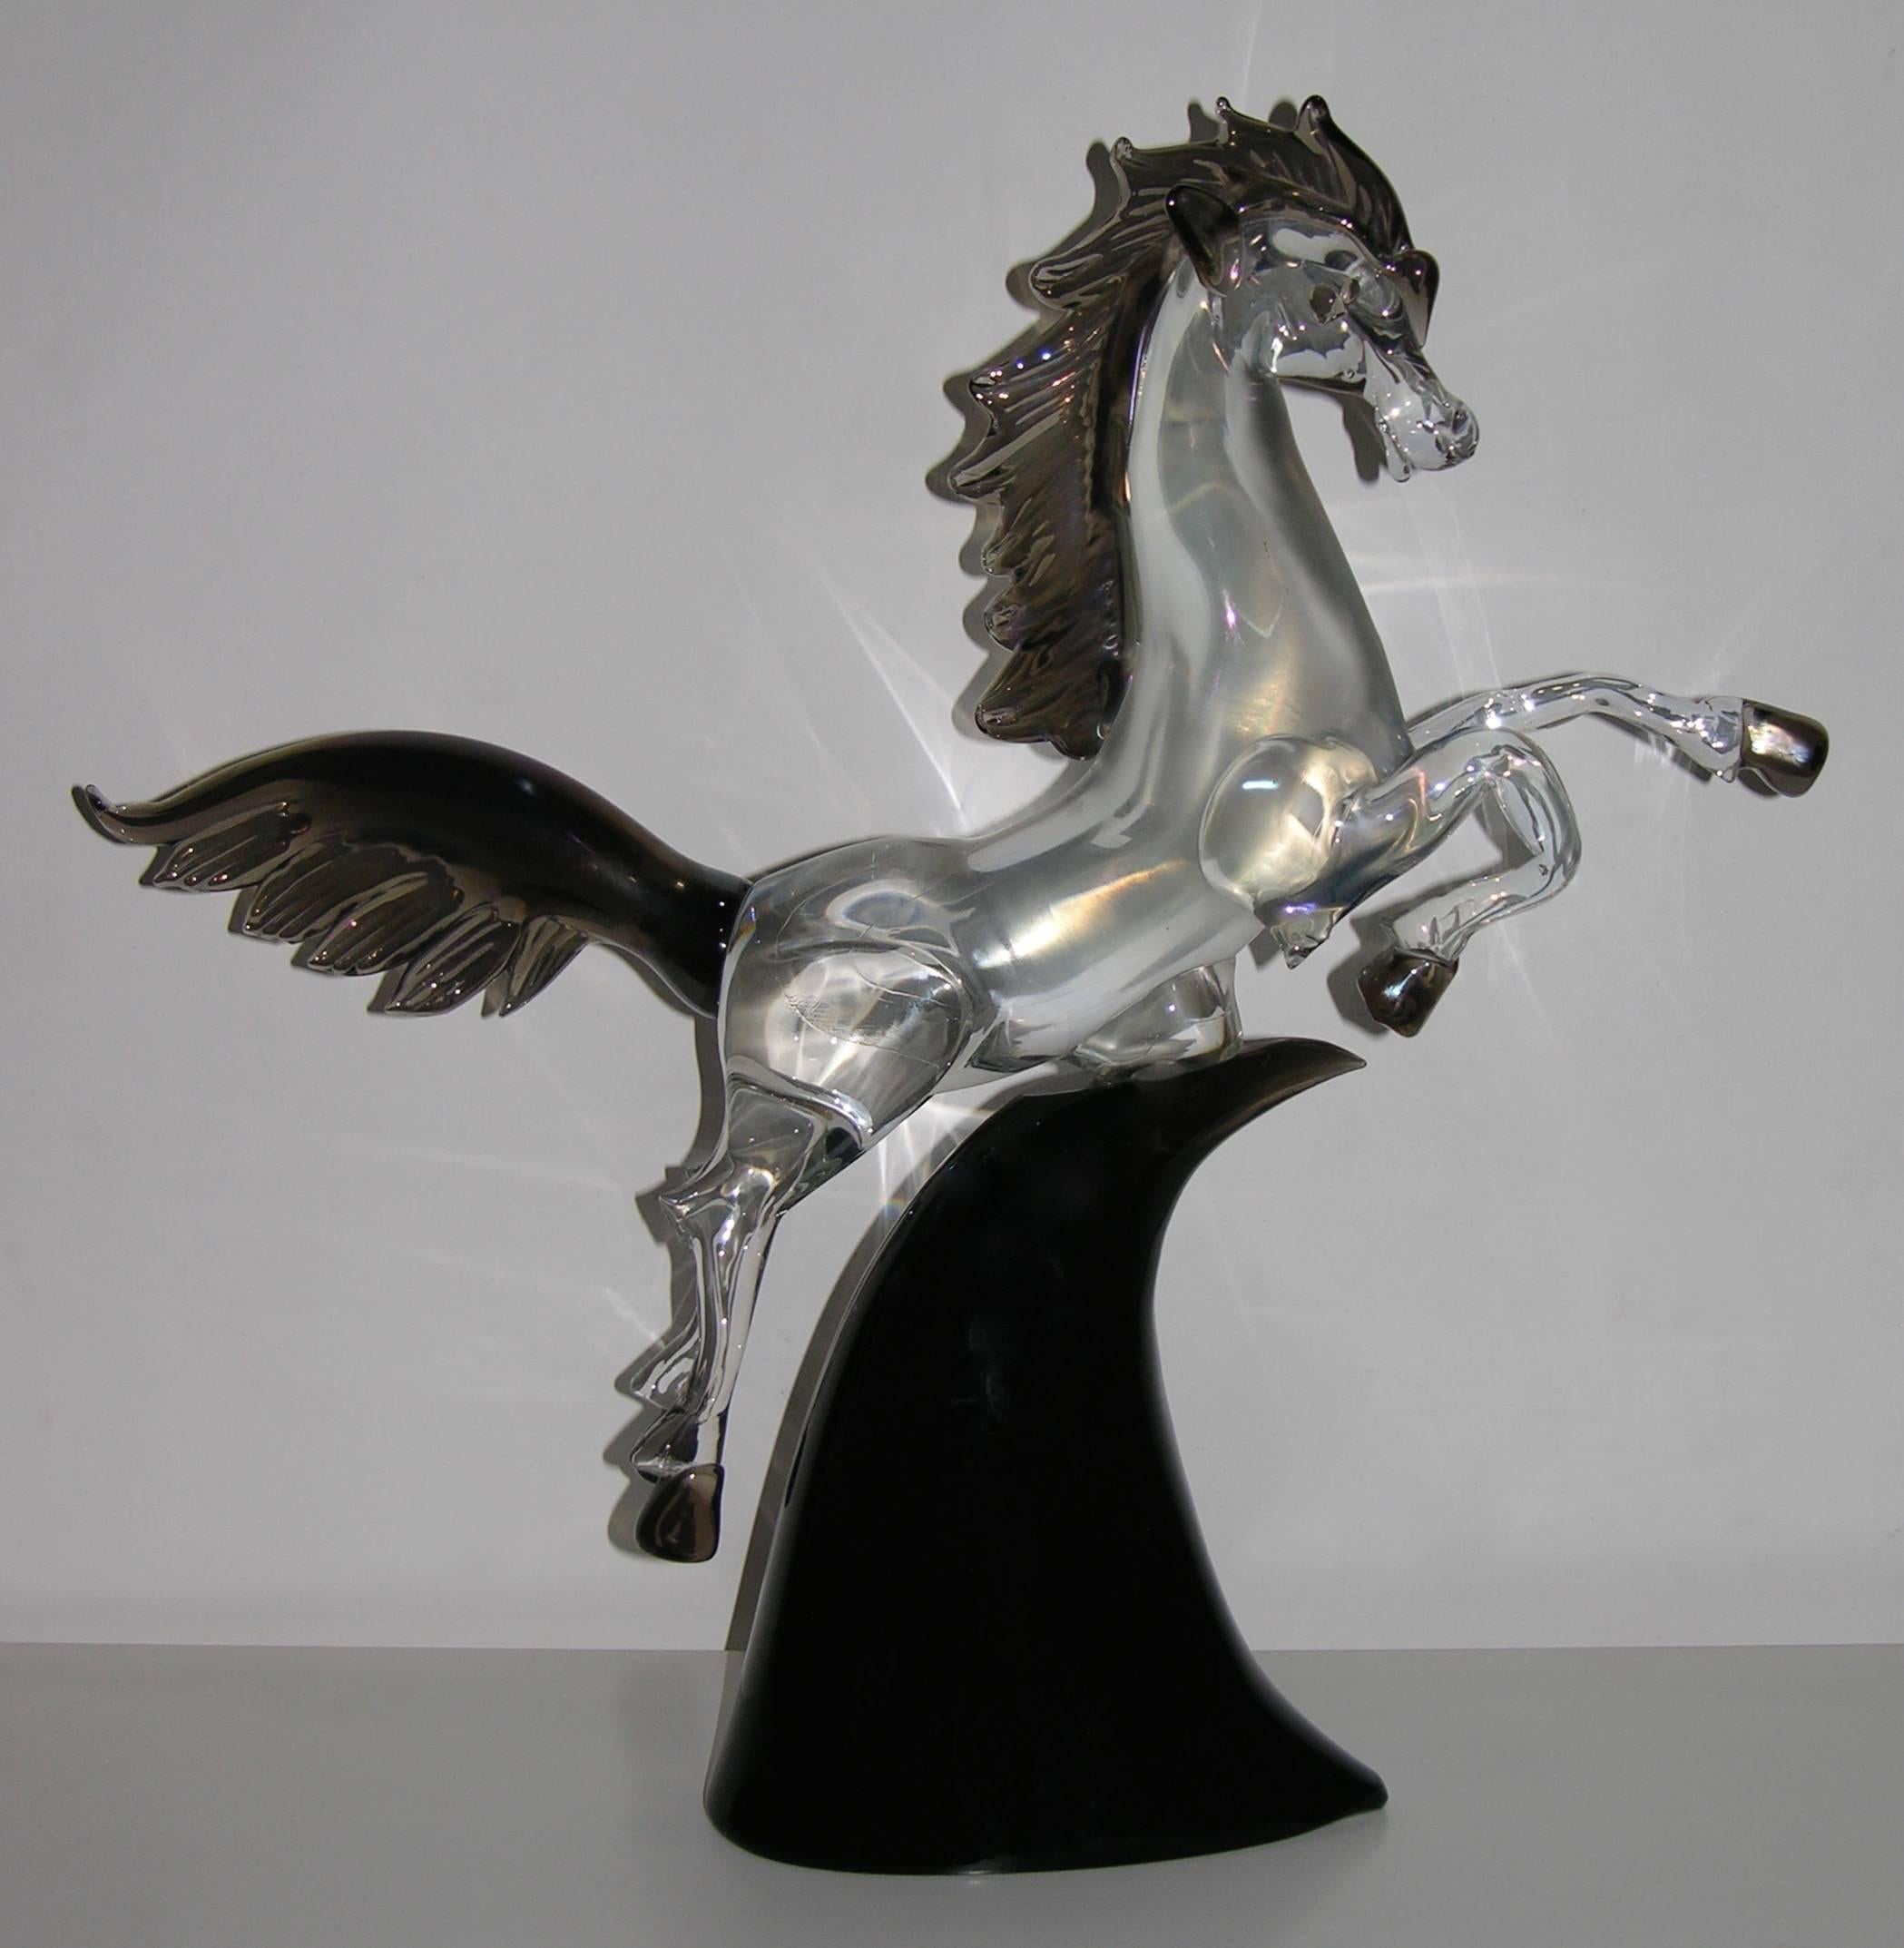 A work of art signed by Licio Zanetti, a jumping horse in clear Murano glass worked with iridescence, with smoked mane, tail and hoofs. The iridescence creates changing shades of tones that give life and movement to the animal, raised on an